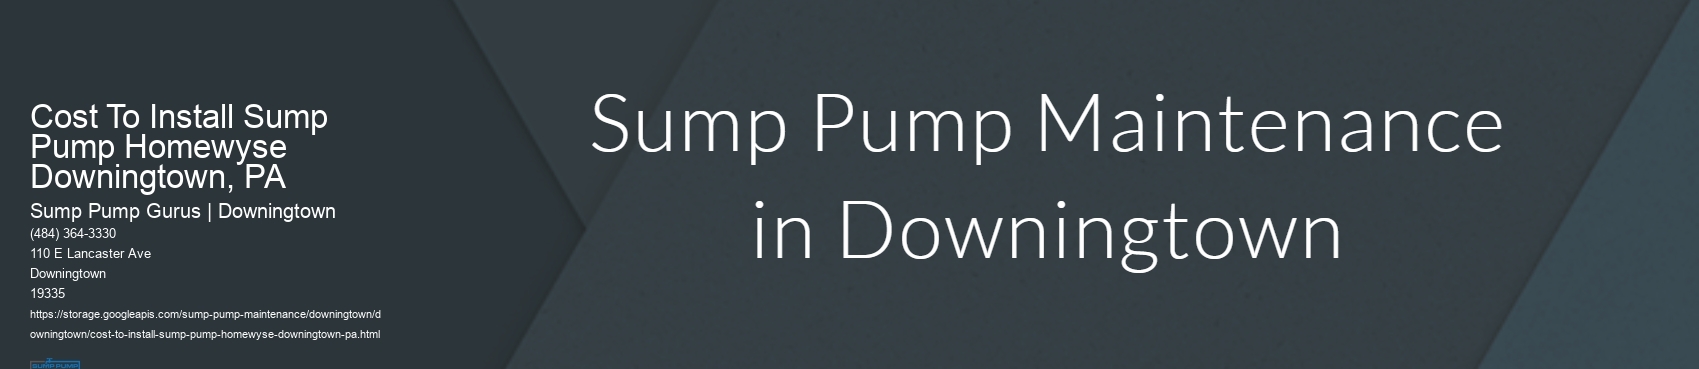 Cost To Install Sump Pump Homewyse Downingtown, PA